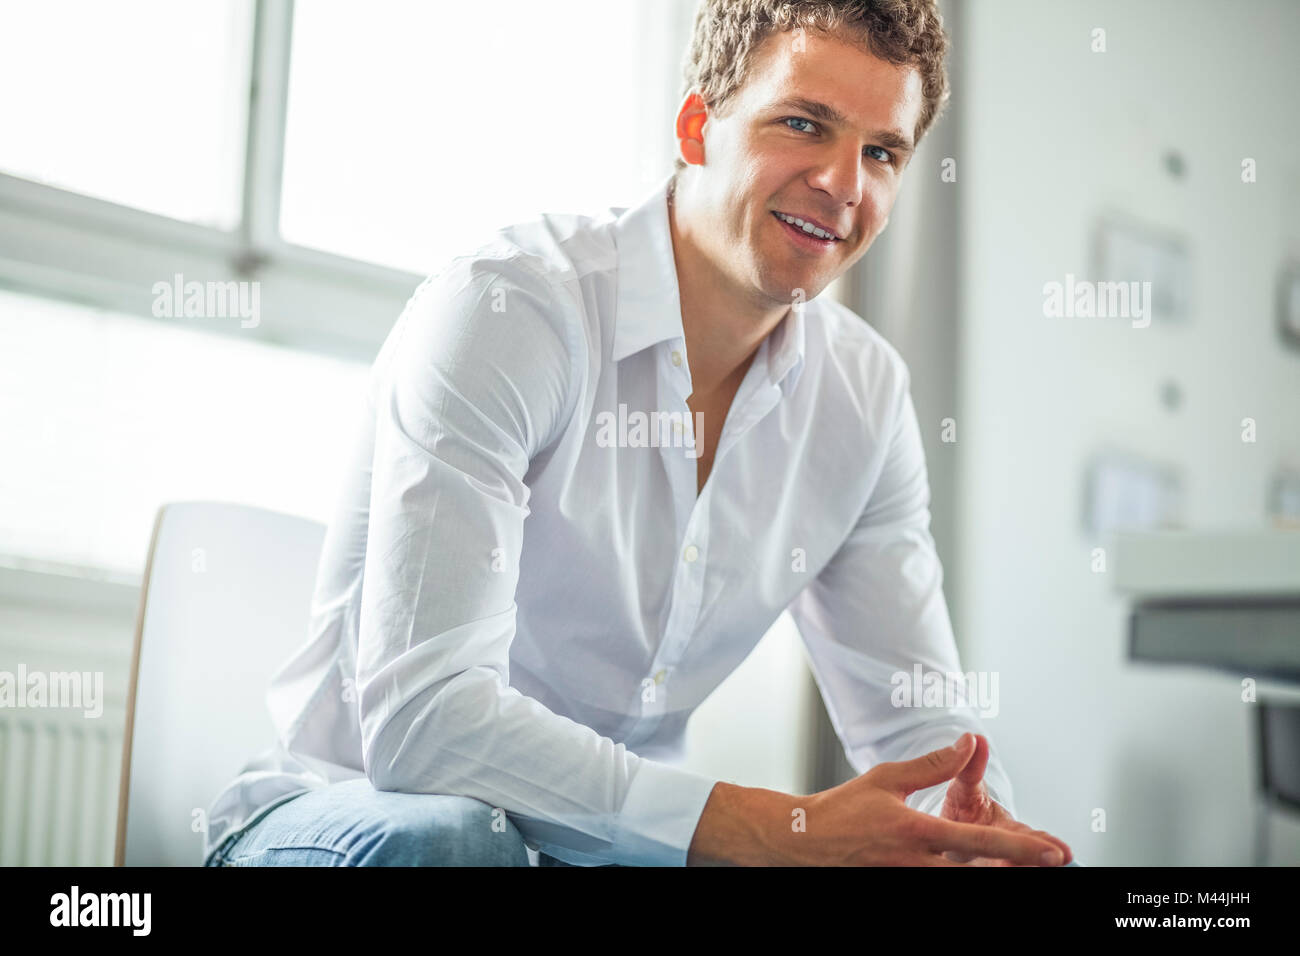 Portrait of confident young businessman sitting in office Stock Photo